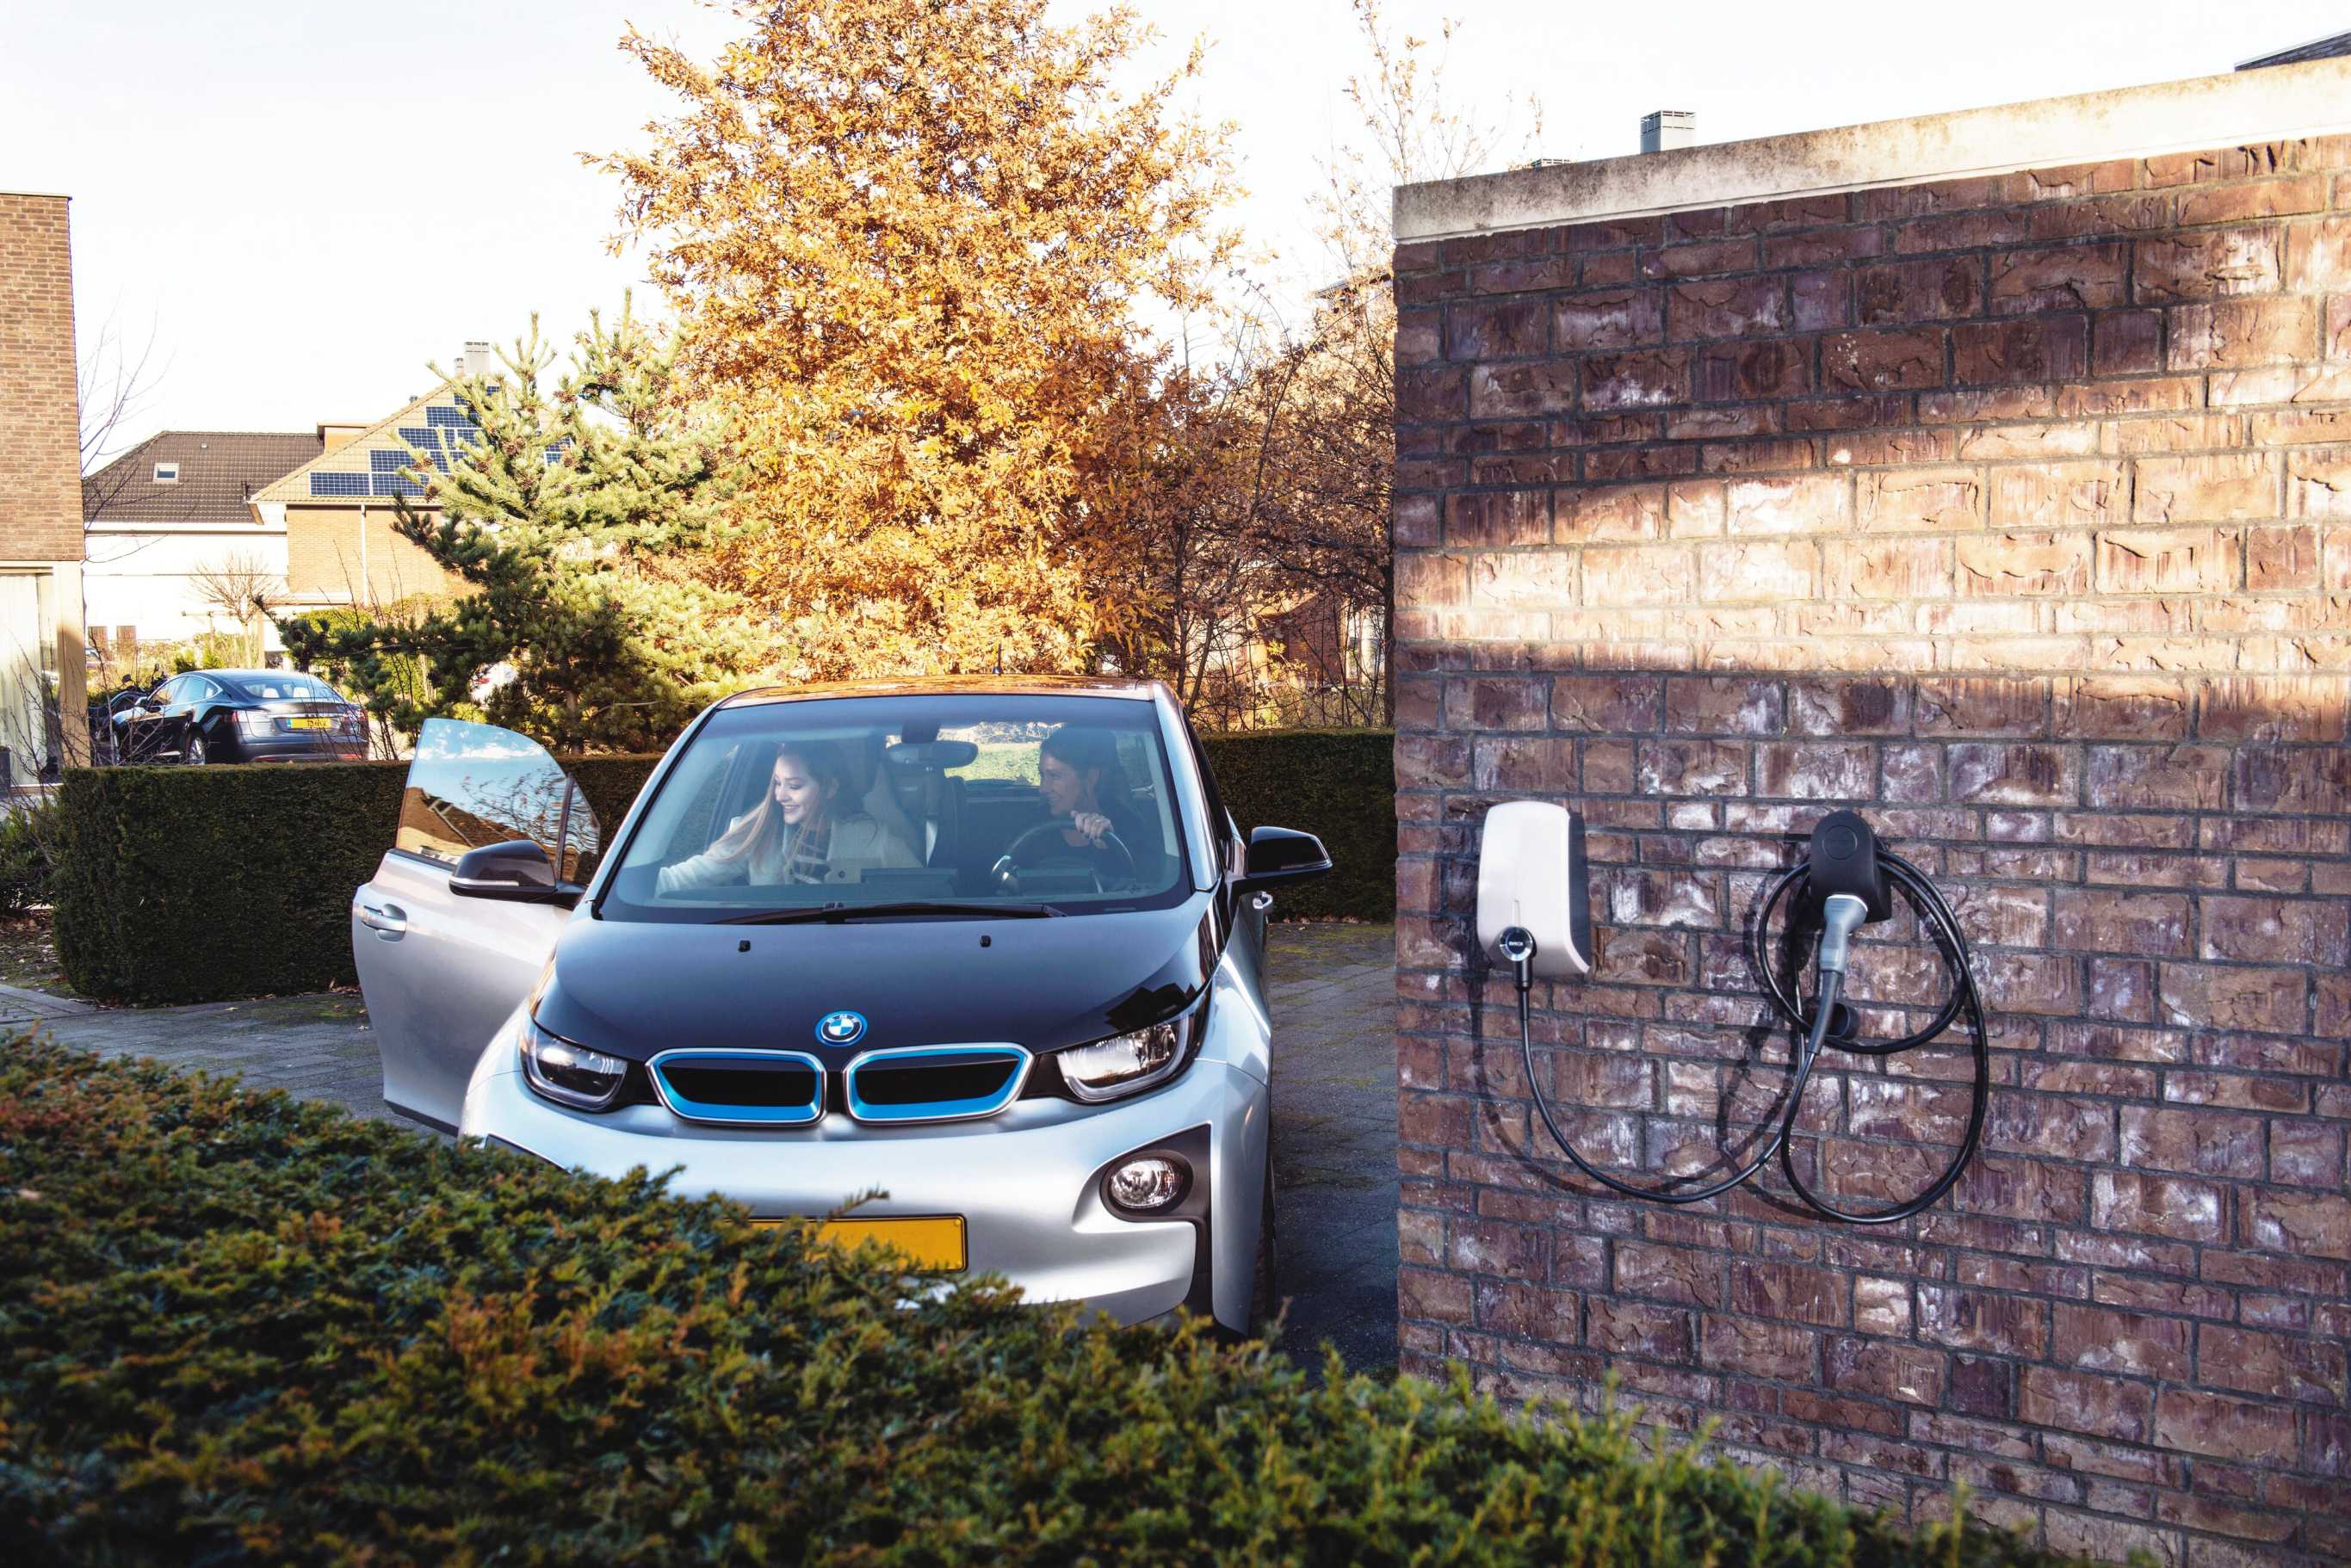 A young girls getting into an electric car on the passenger side, an older lady is sitting behind the wheel. An EVBox Elvi home charging station is mounted on the brick wall beside where the electric car is parked.